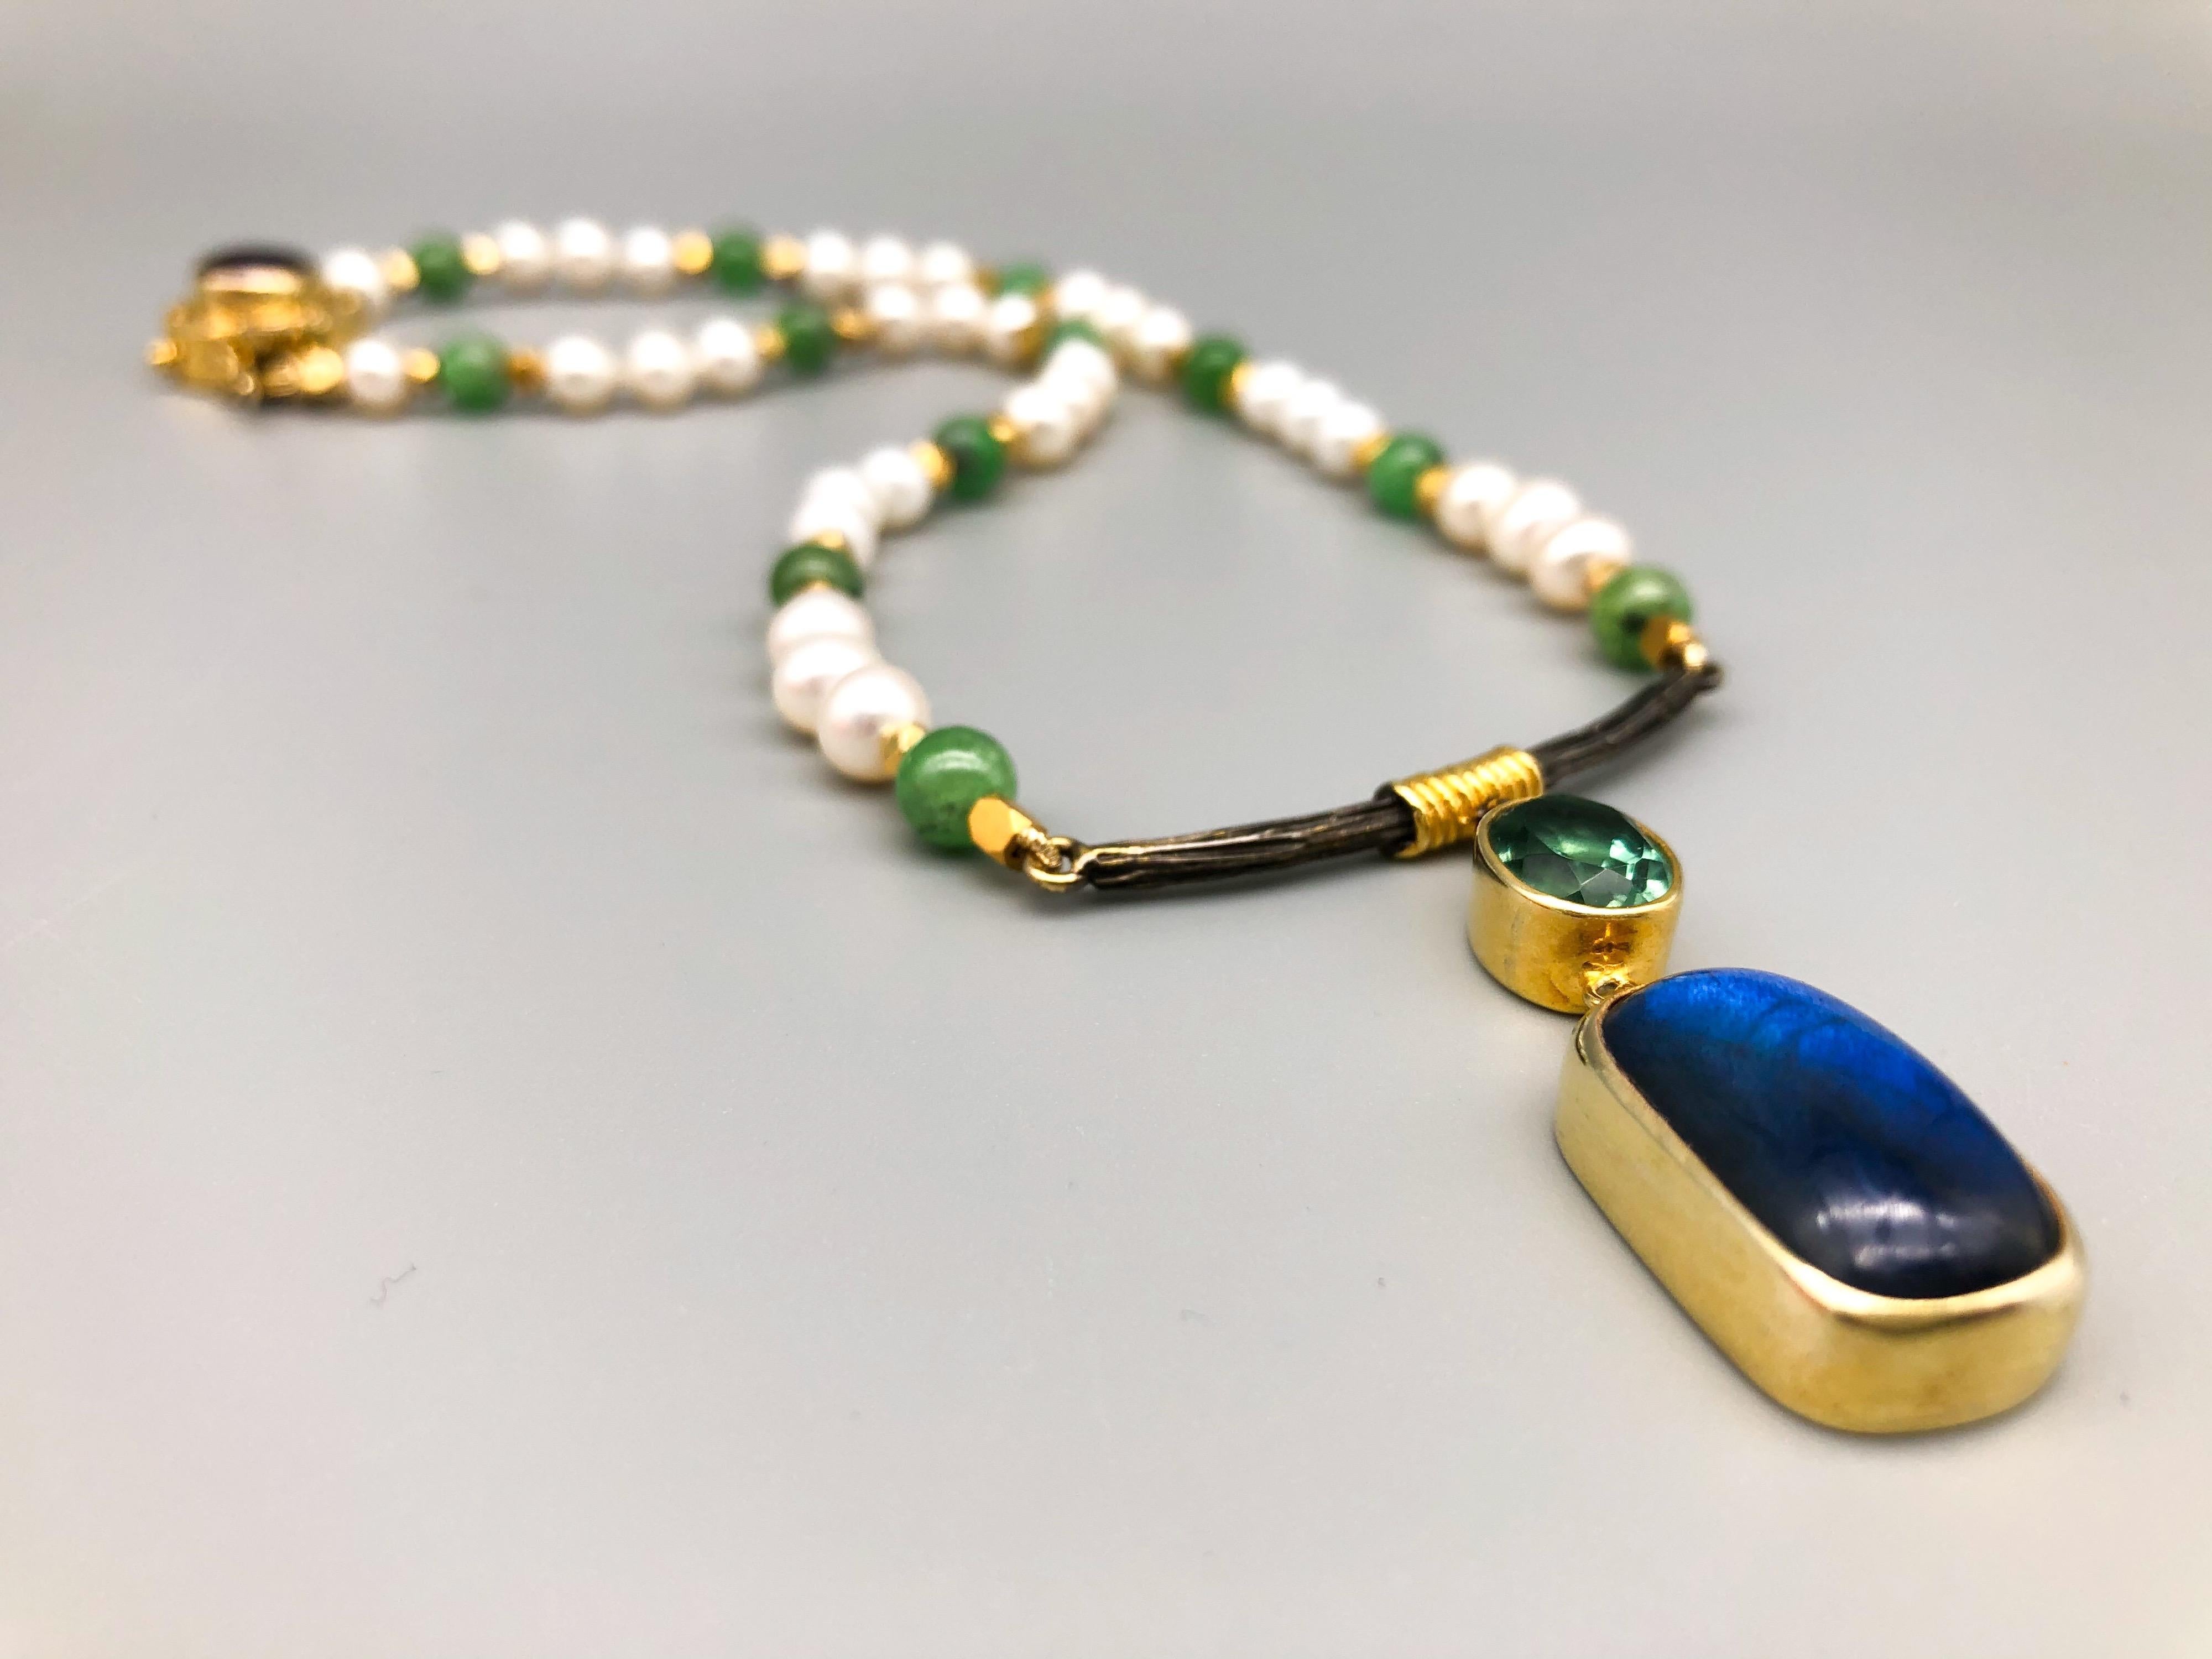 Contemporary A.Jeschel Pendant Necklace with Pearls and Emerald beads is dreamy. For Sale